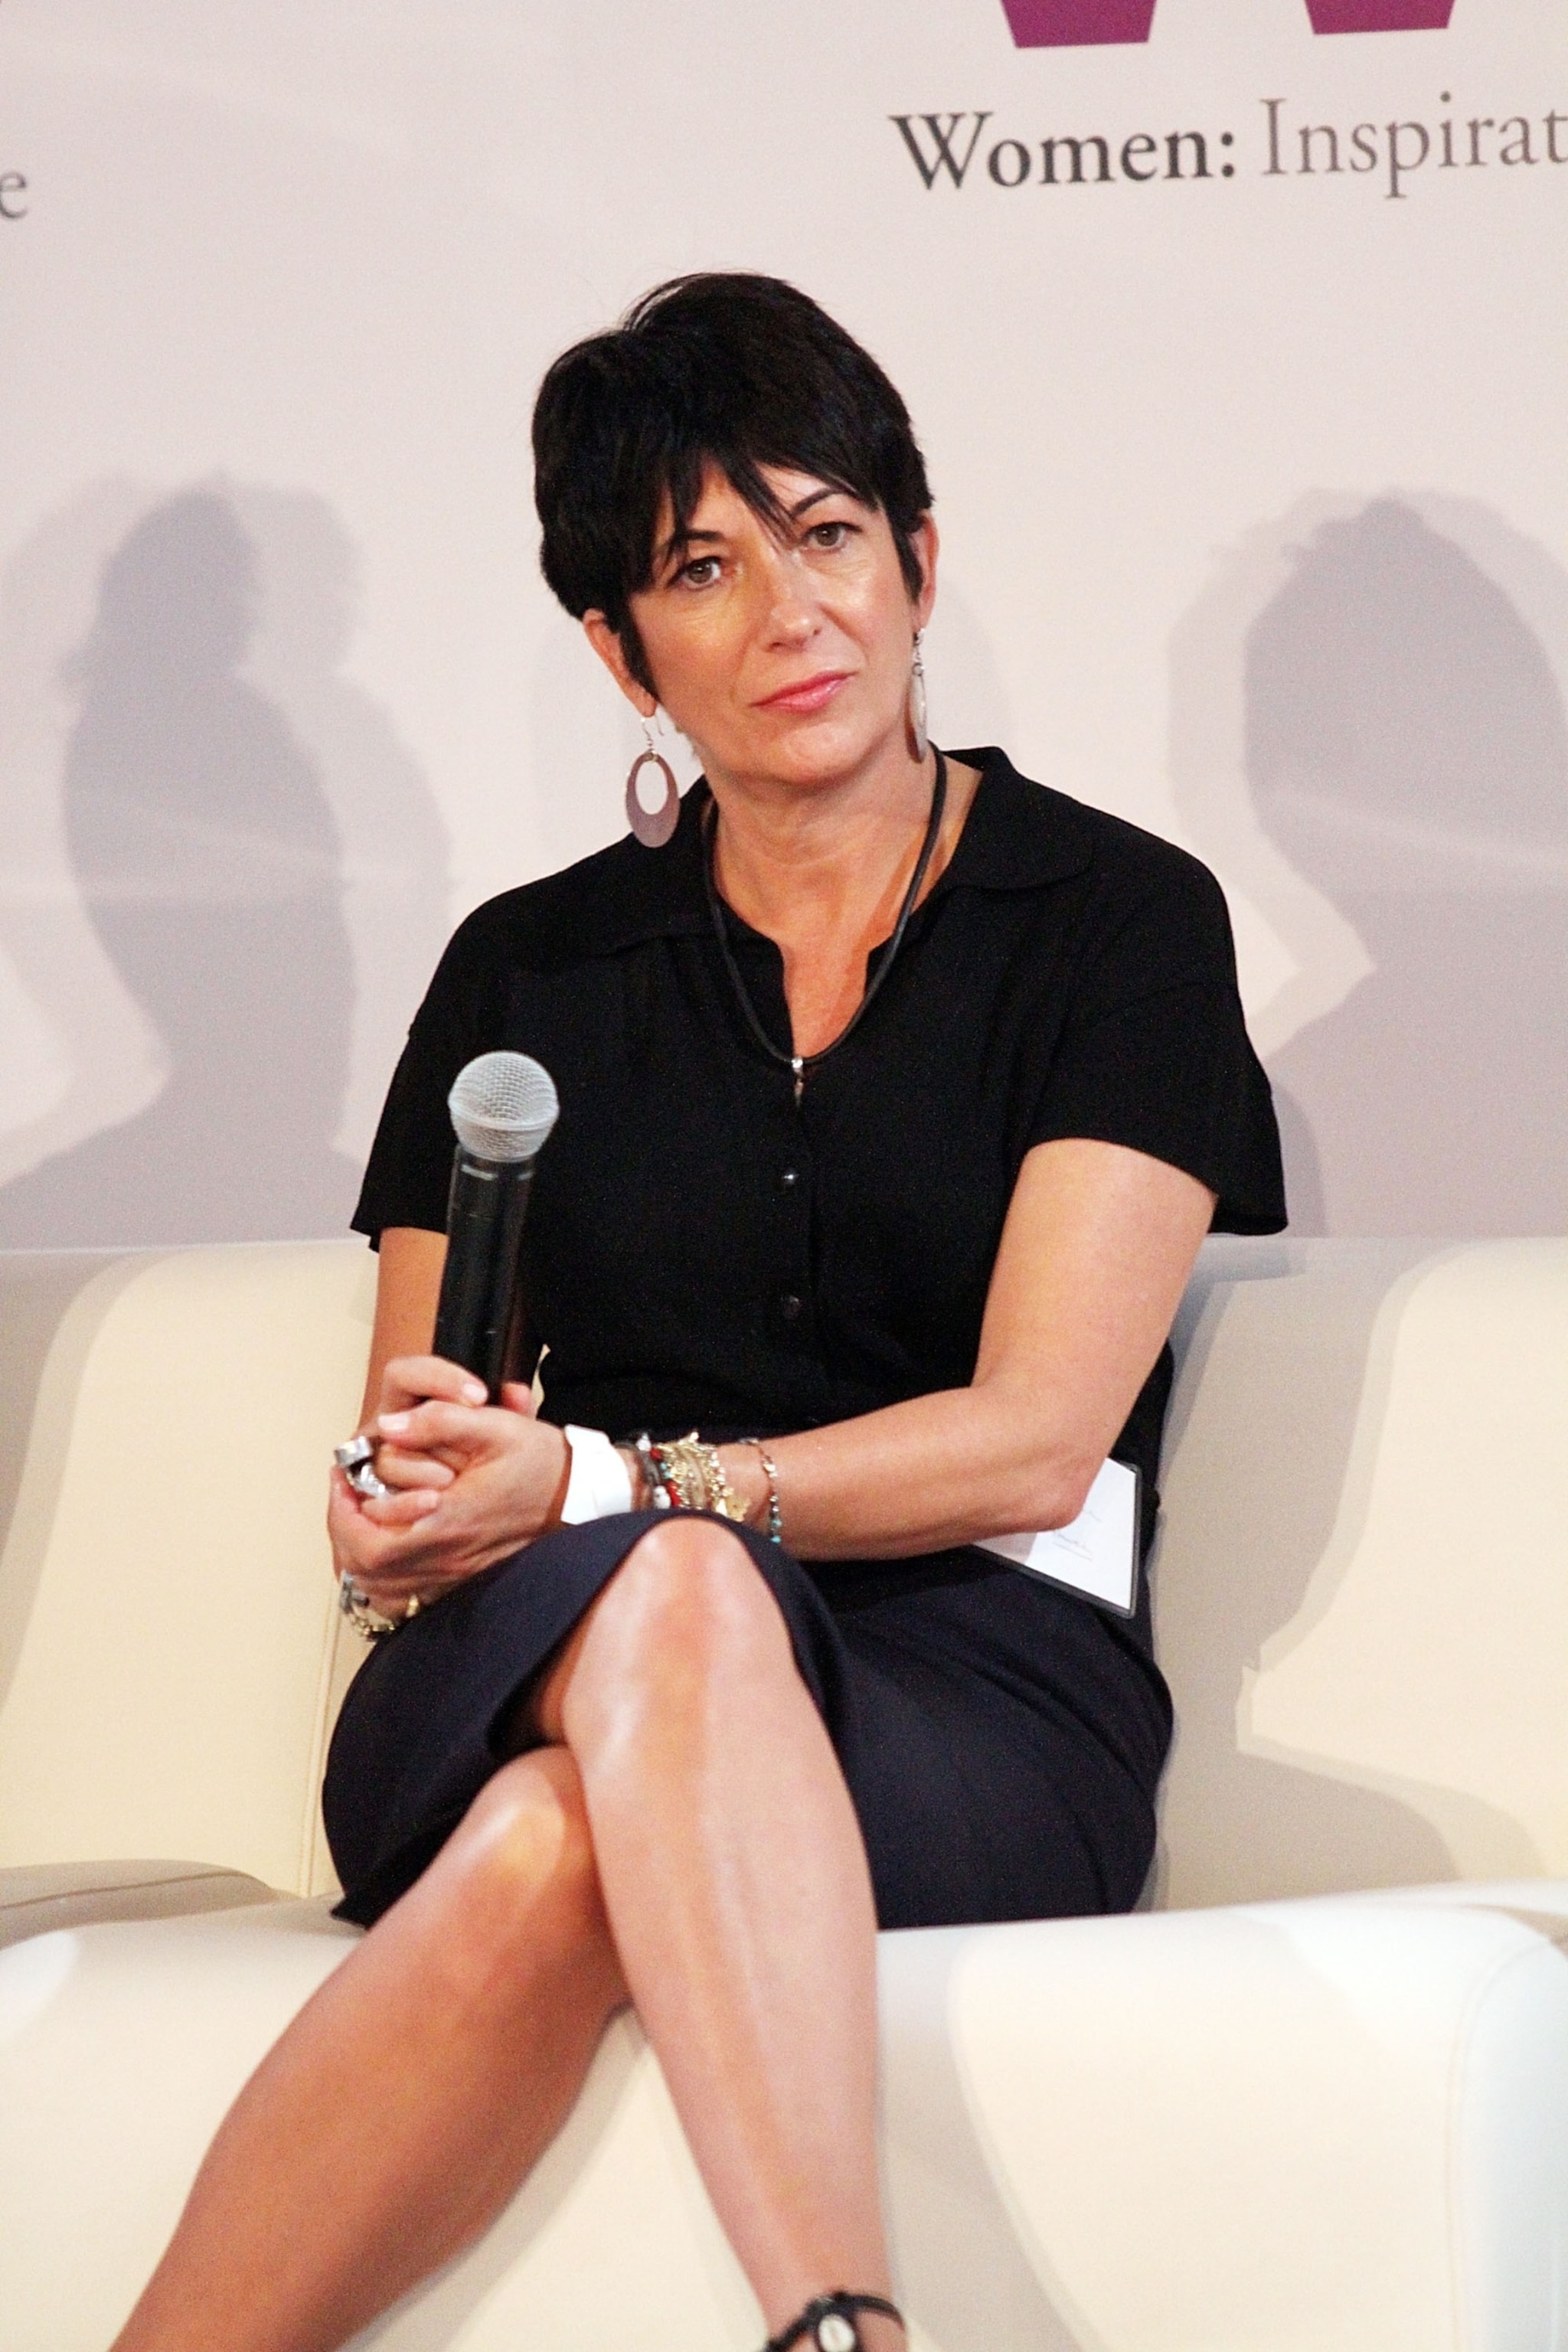 PHOTO: In this Sept. 20, 2013 file photo, Ghislaine Maxwell attends day one of the 4th Annual WIE Symposium at Center 548 in New York.